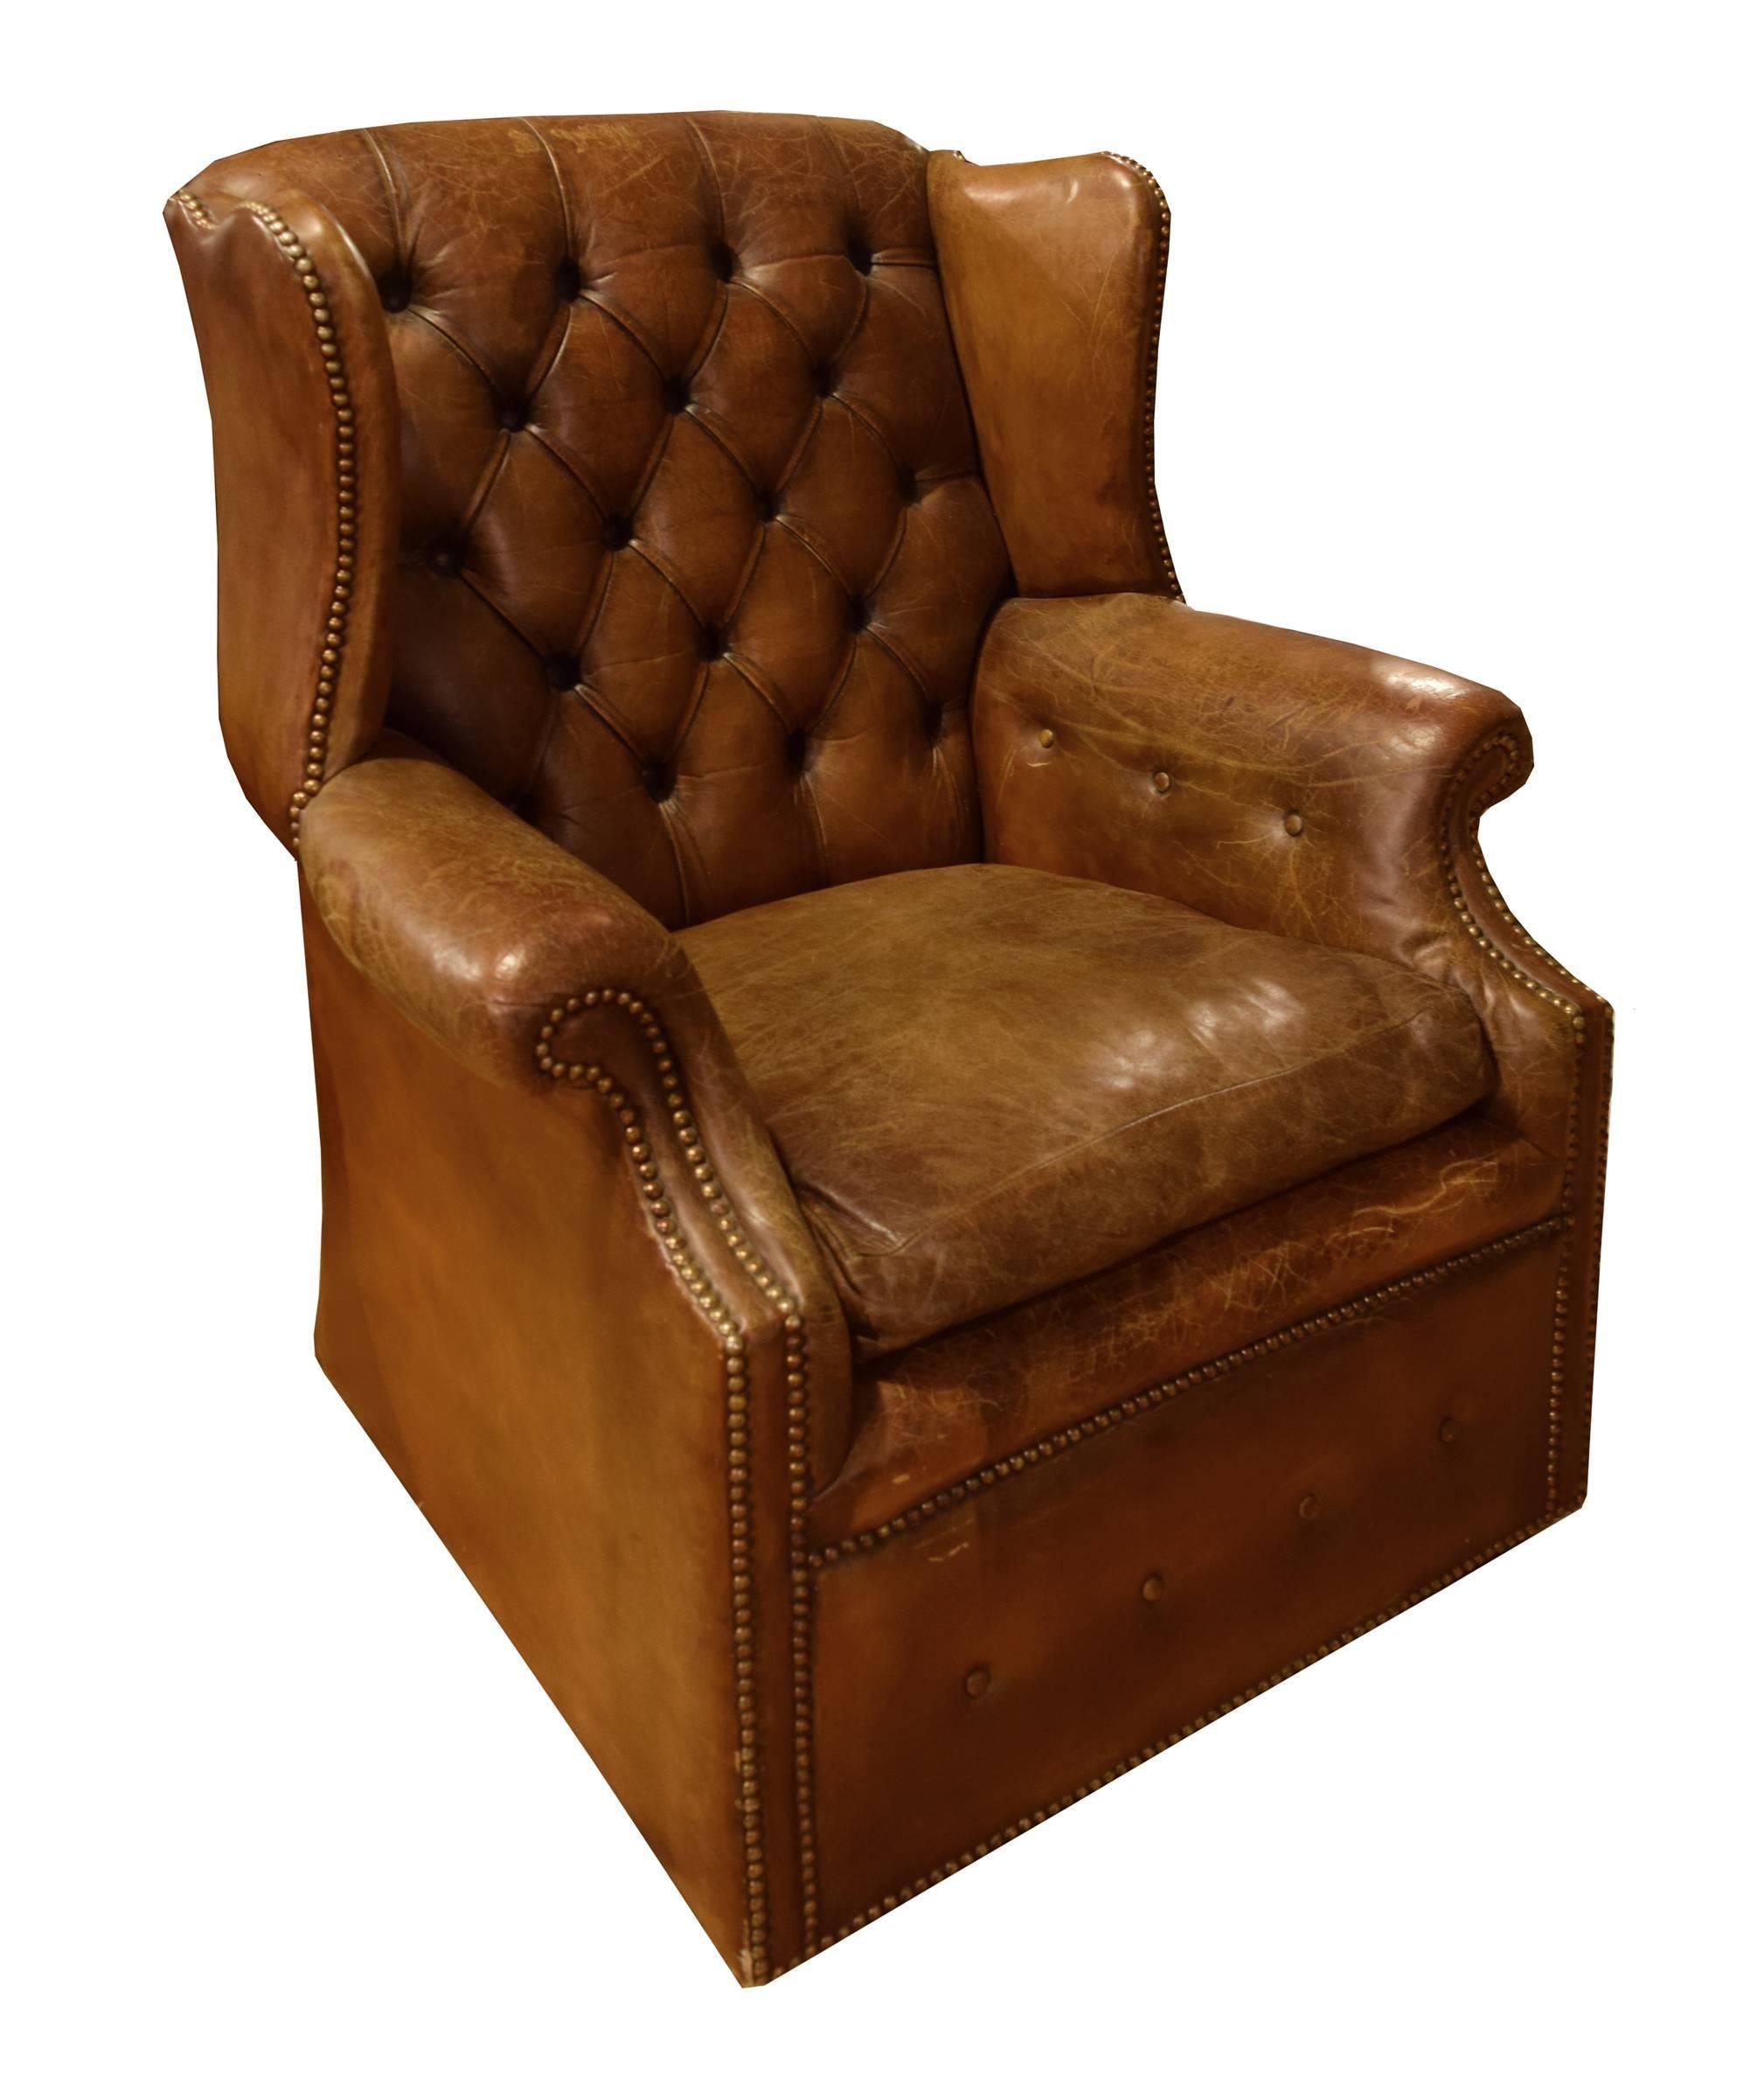 Antique tufted wingback on castors chair from Italy. This chair possesses beautifully worn original Italian leather, gently curved arms and fabulous studded detailing.